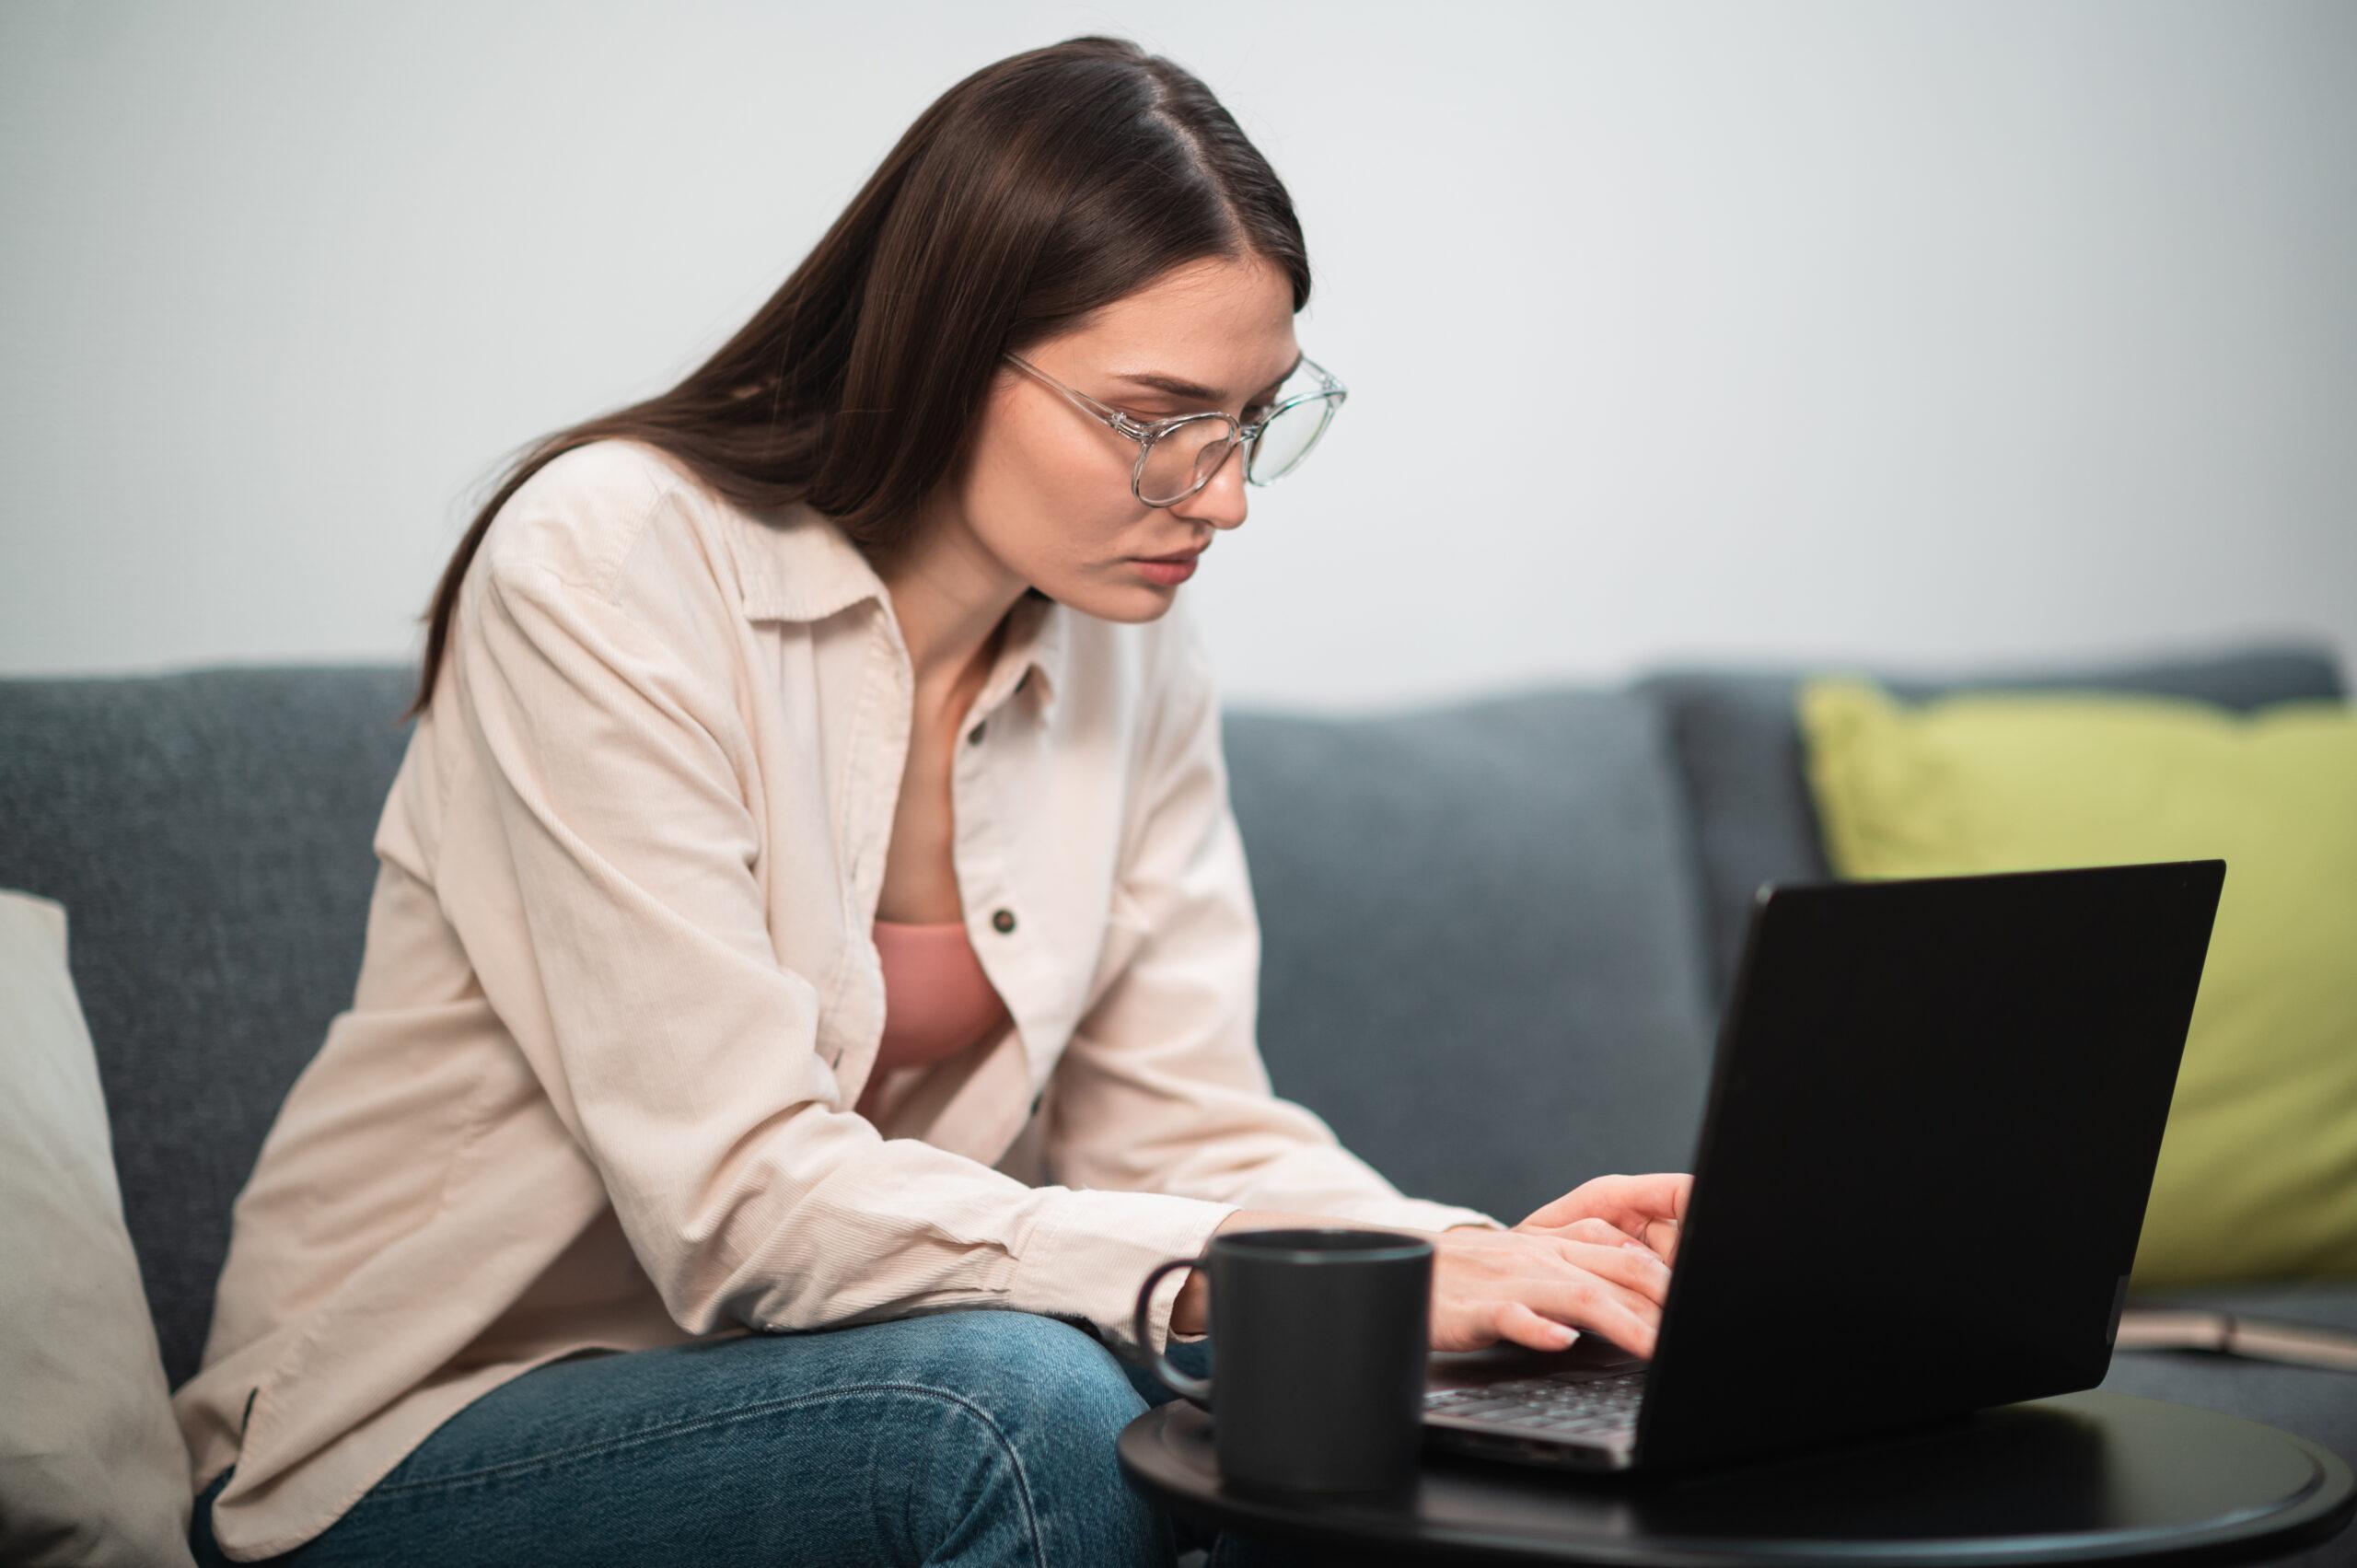 Young woman with glasses sitting on the couch and working on laptop